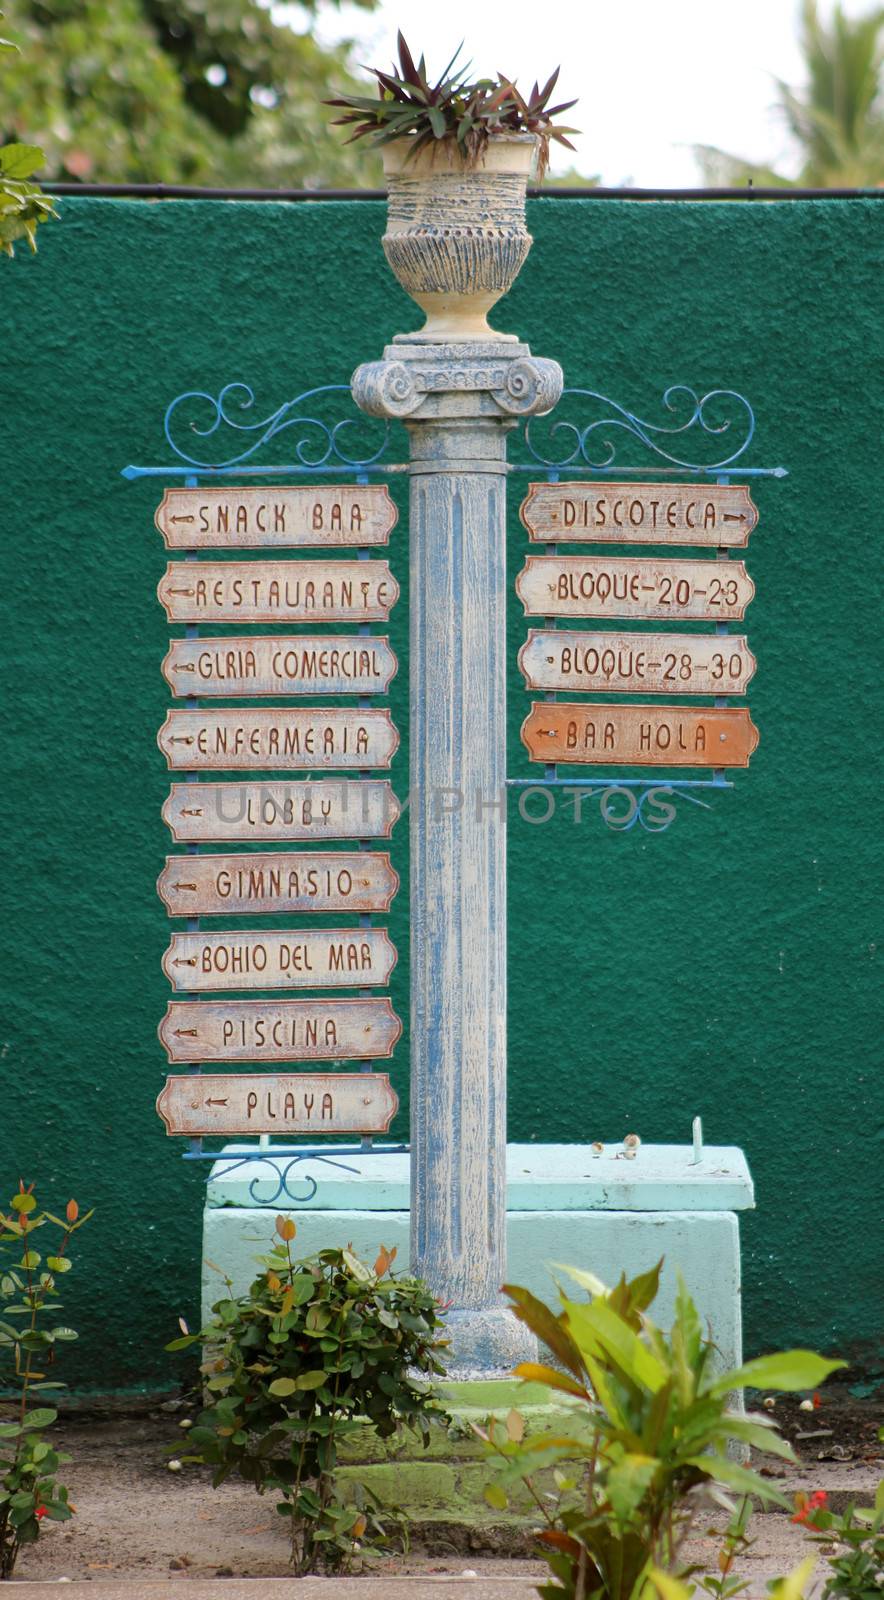 A Spanish sign post at a Cuban resort, pointing the way to various areas